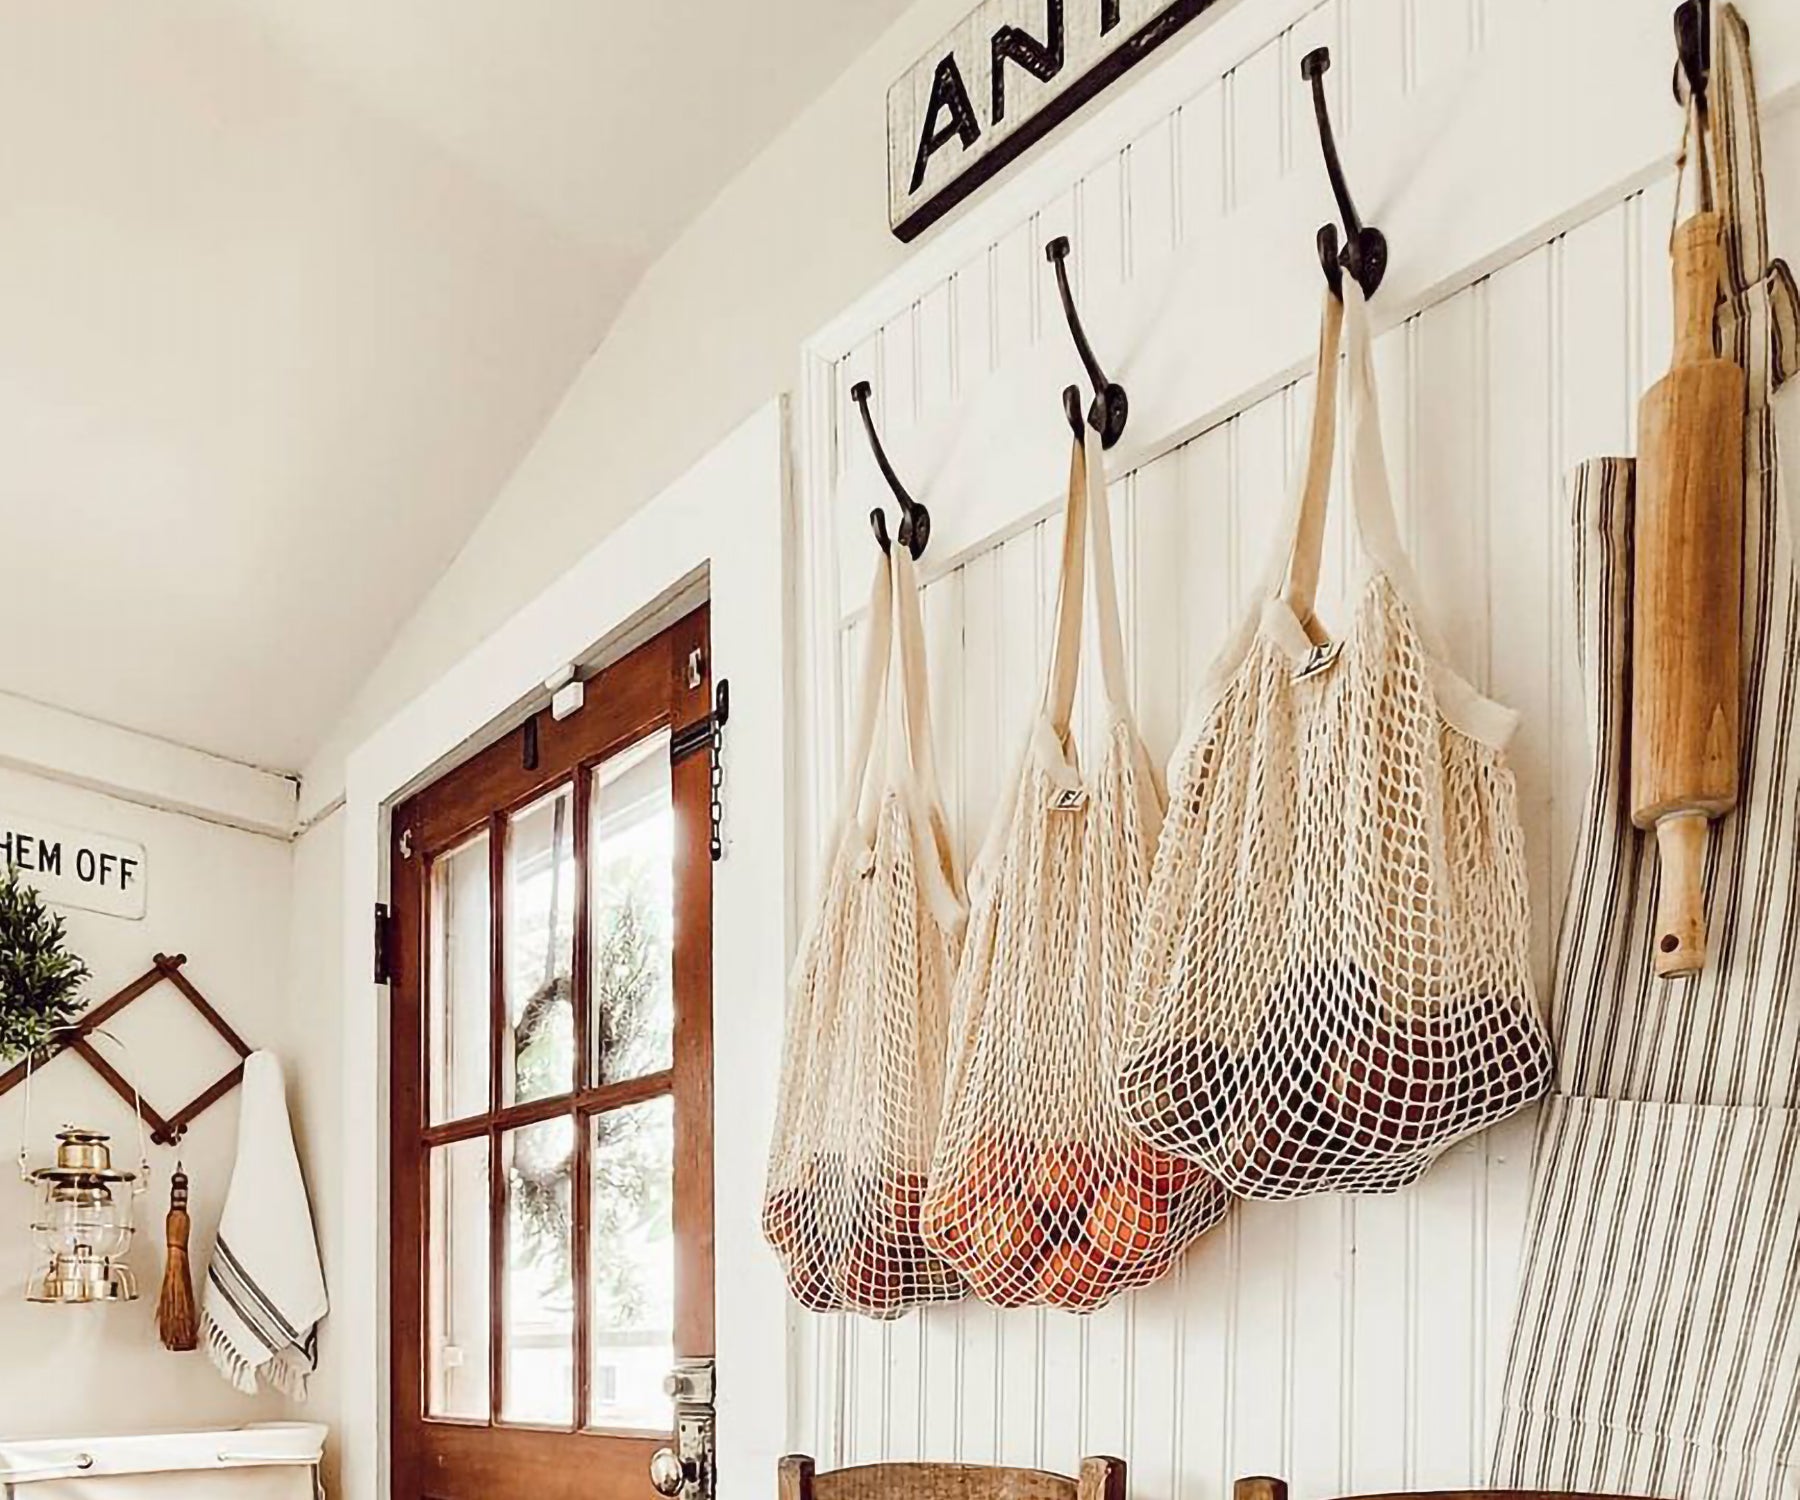 String produce bag hanging in a rustic kitchen setting with wooden accents